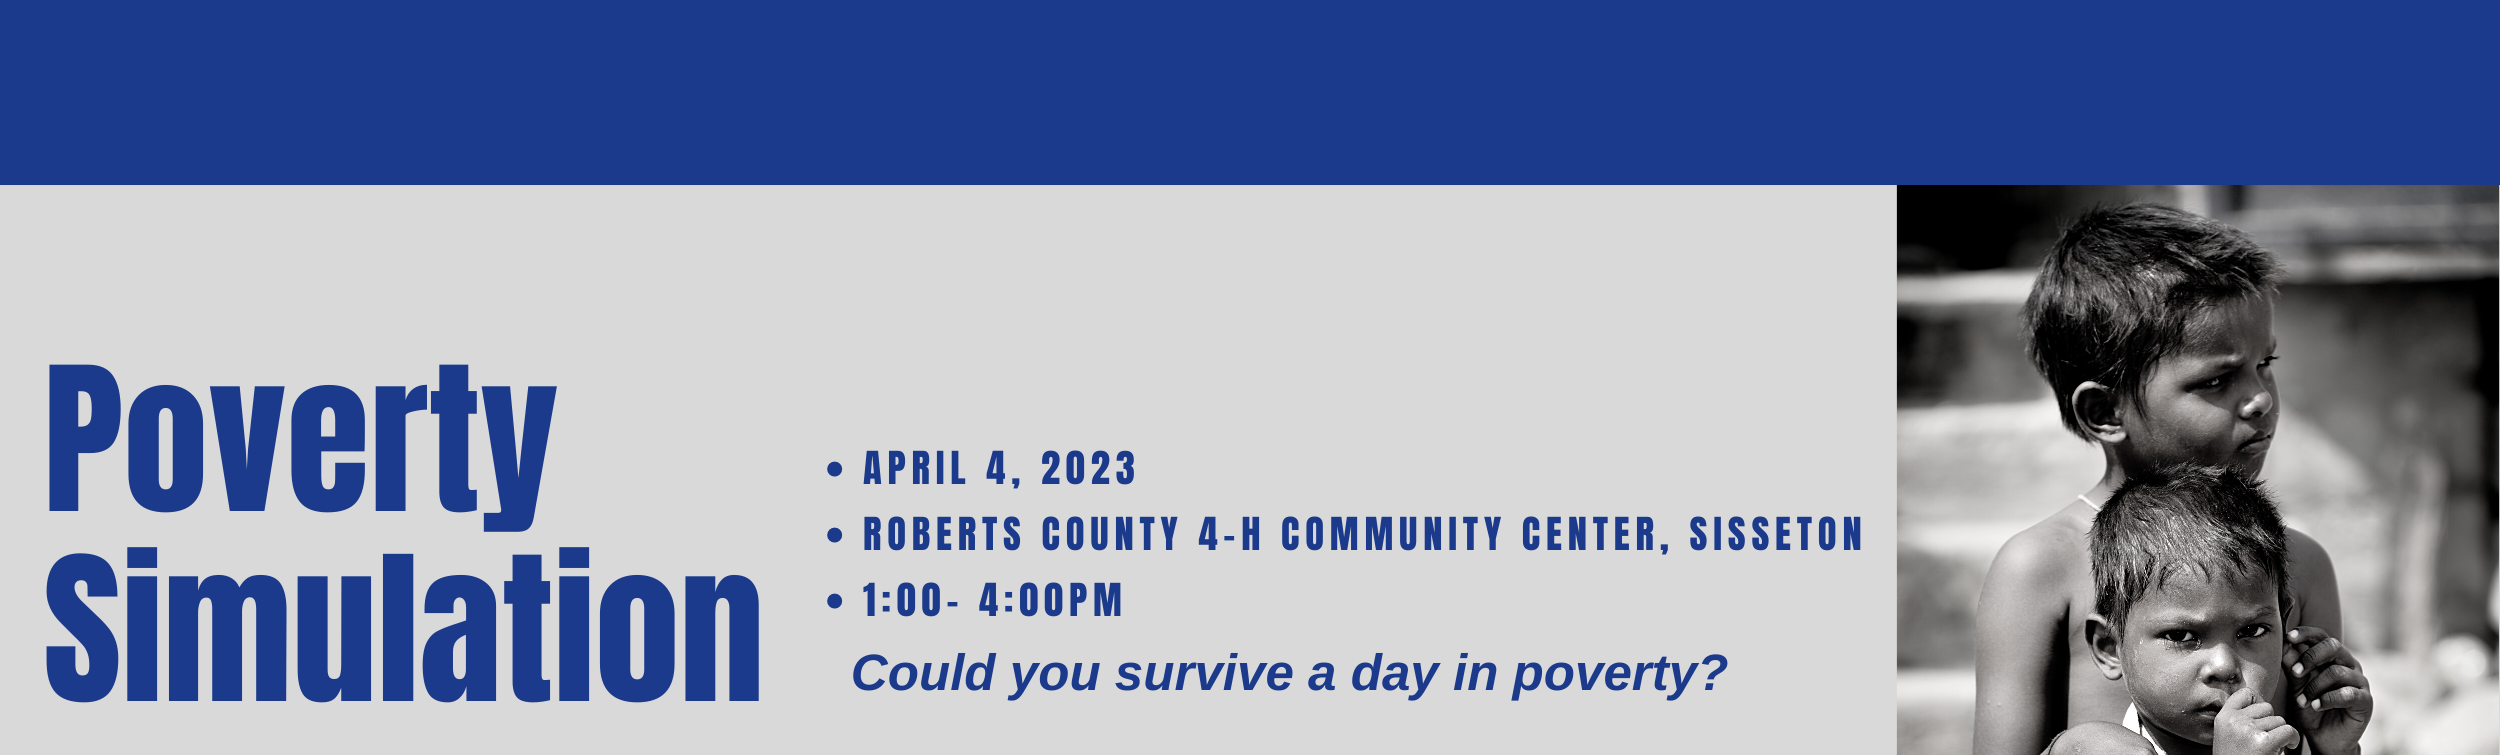 Poverty Simulation coming up.